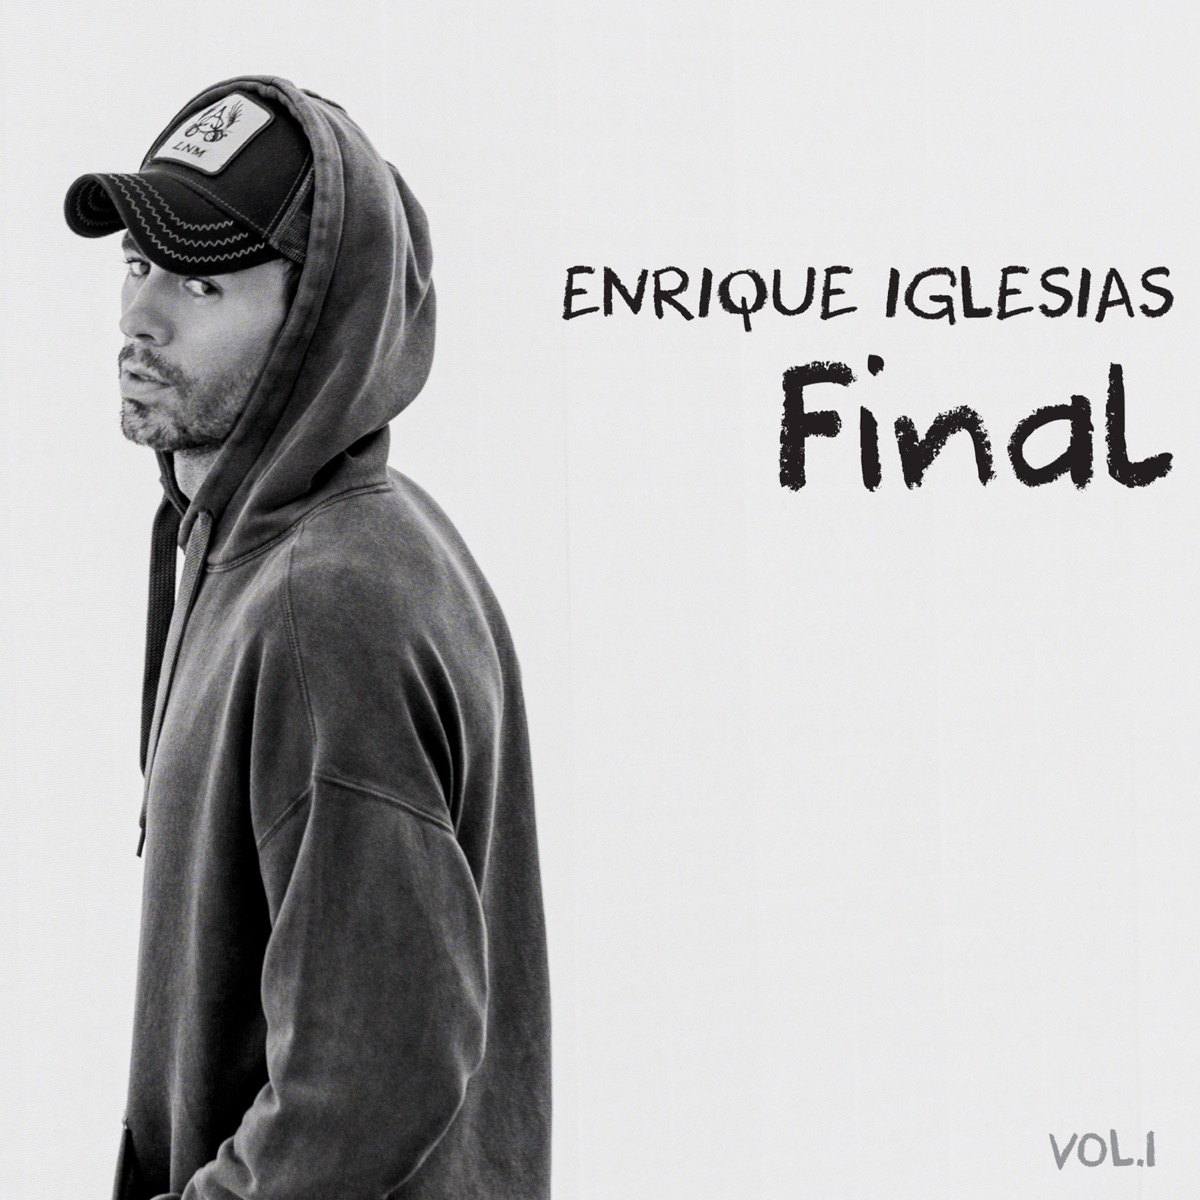 FINAL (Vol.1) by Enrique Iglesias on Apple Music